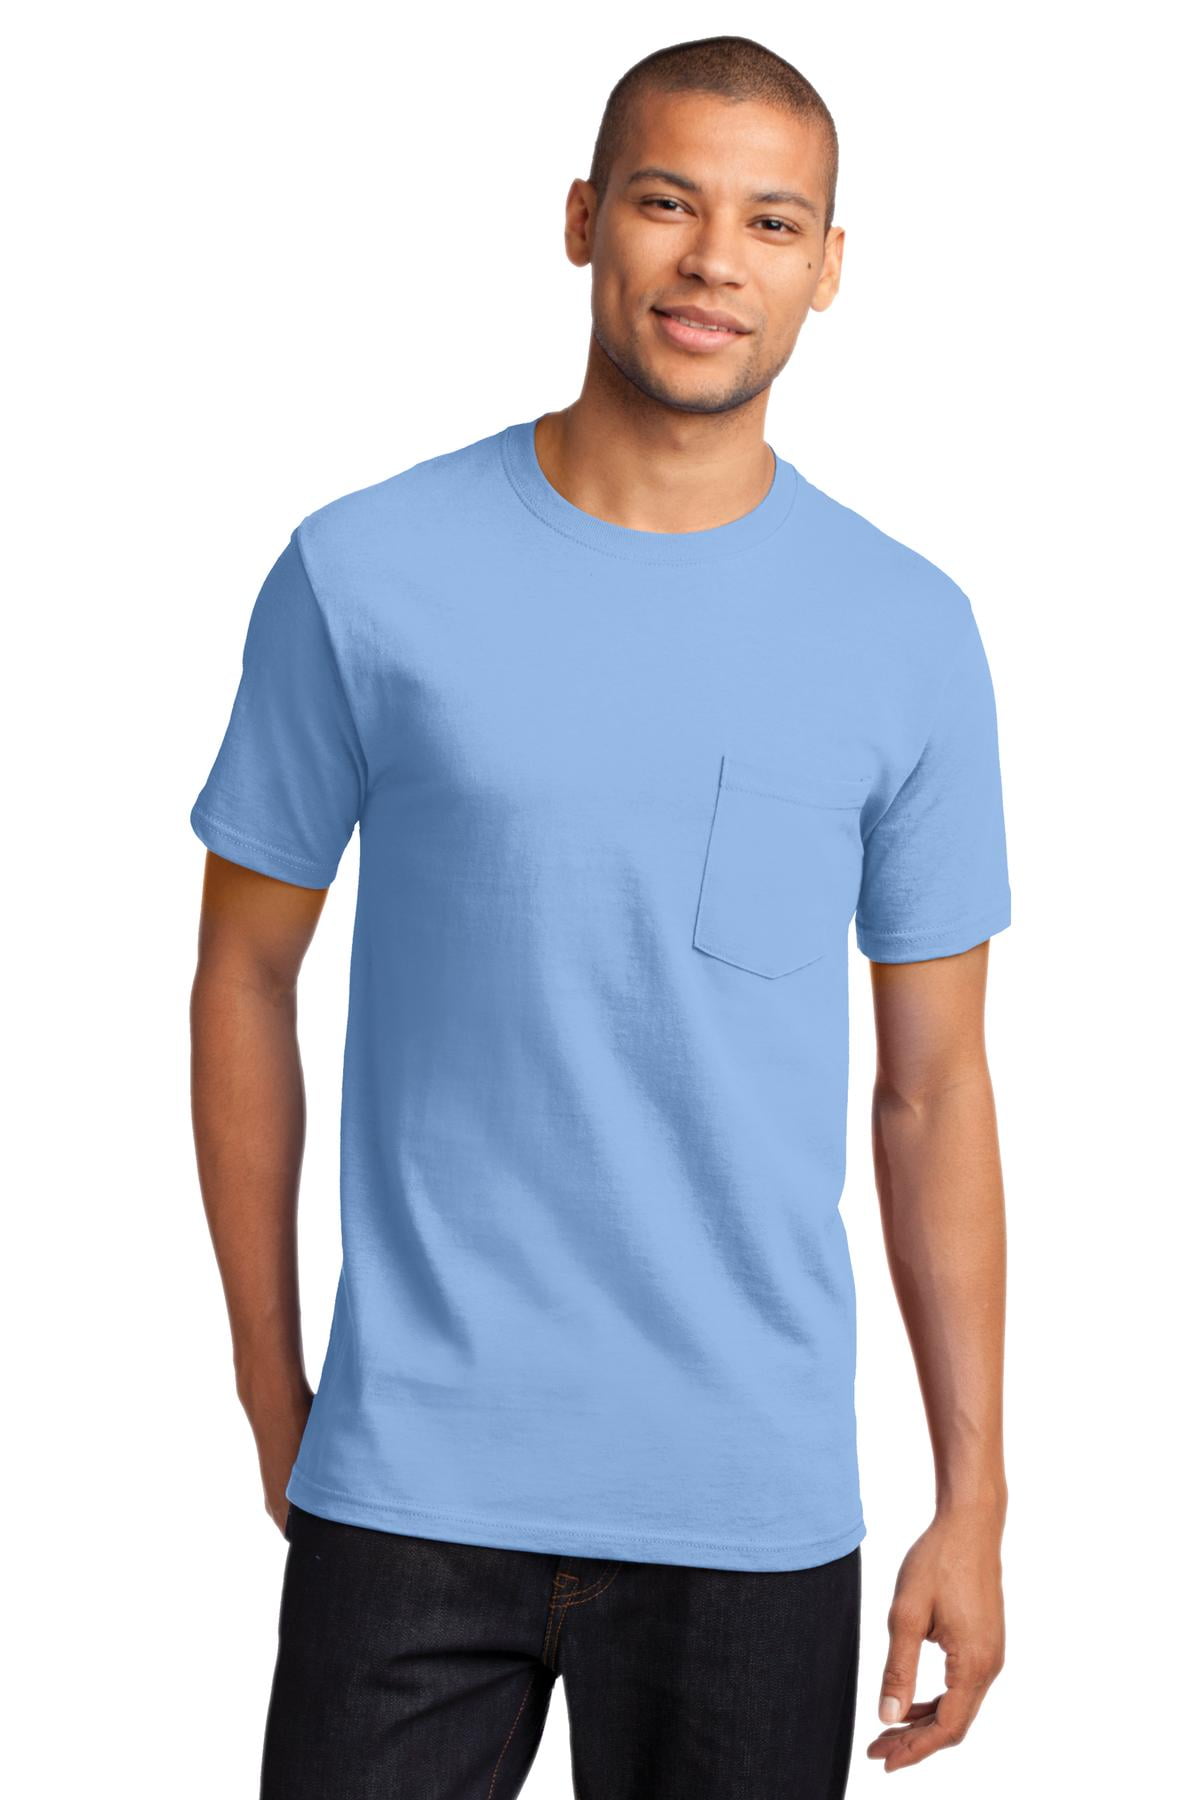 Essential T-Shirt with Pocket. Light 